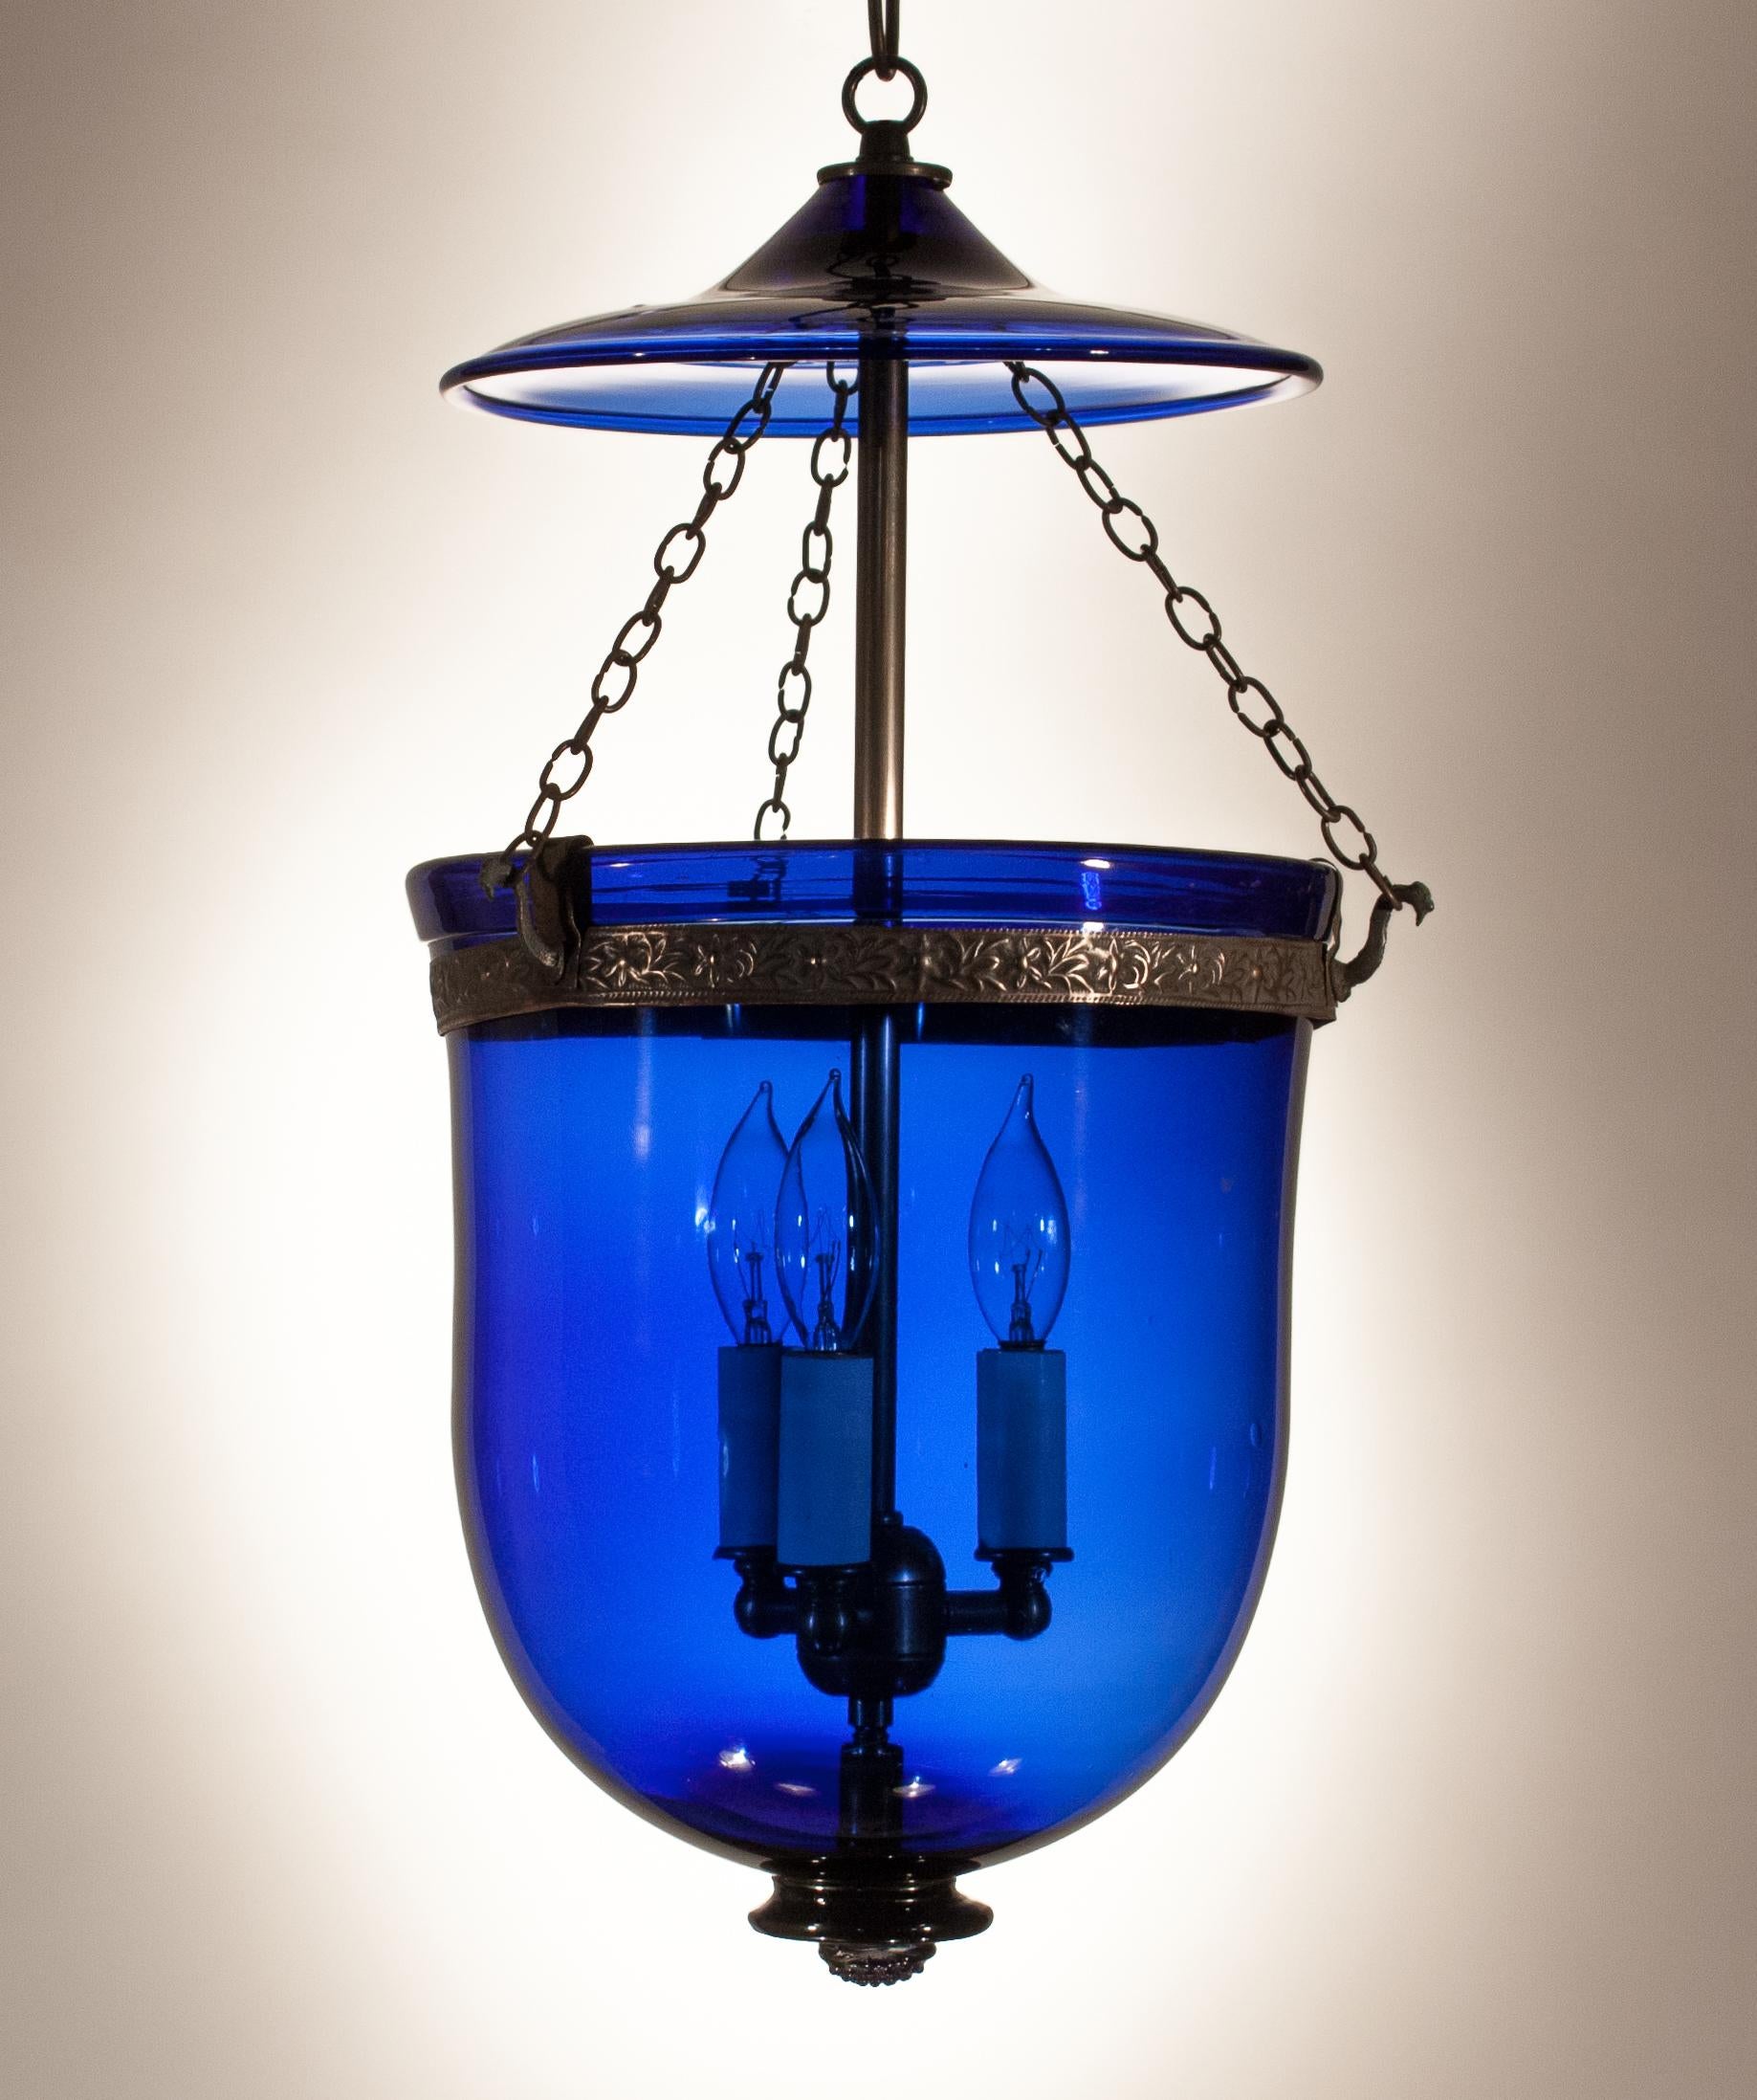 The brilliant sapphire blue of this circa 1880 English hand blown glass bell jar lantern makes it a true gem in our collection. The pendant has its original embossed brass band with floral decoration and glass smoke bell/lid. It has been newly